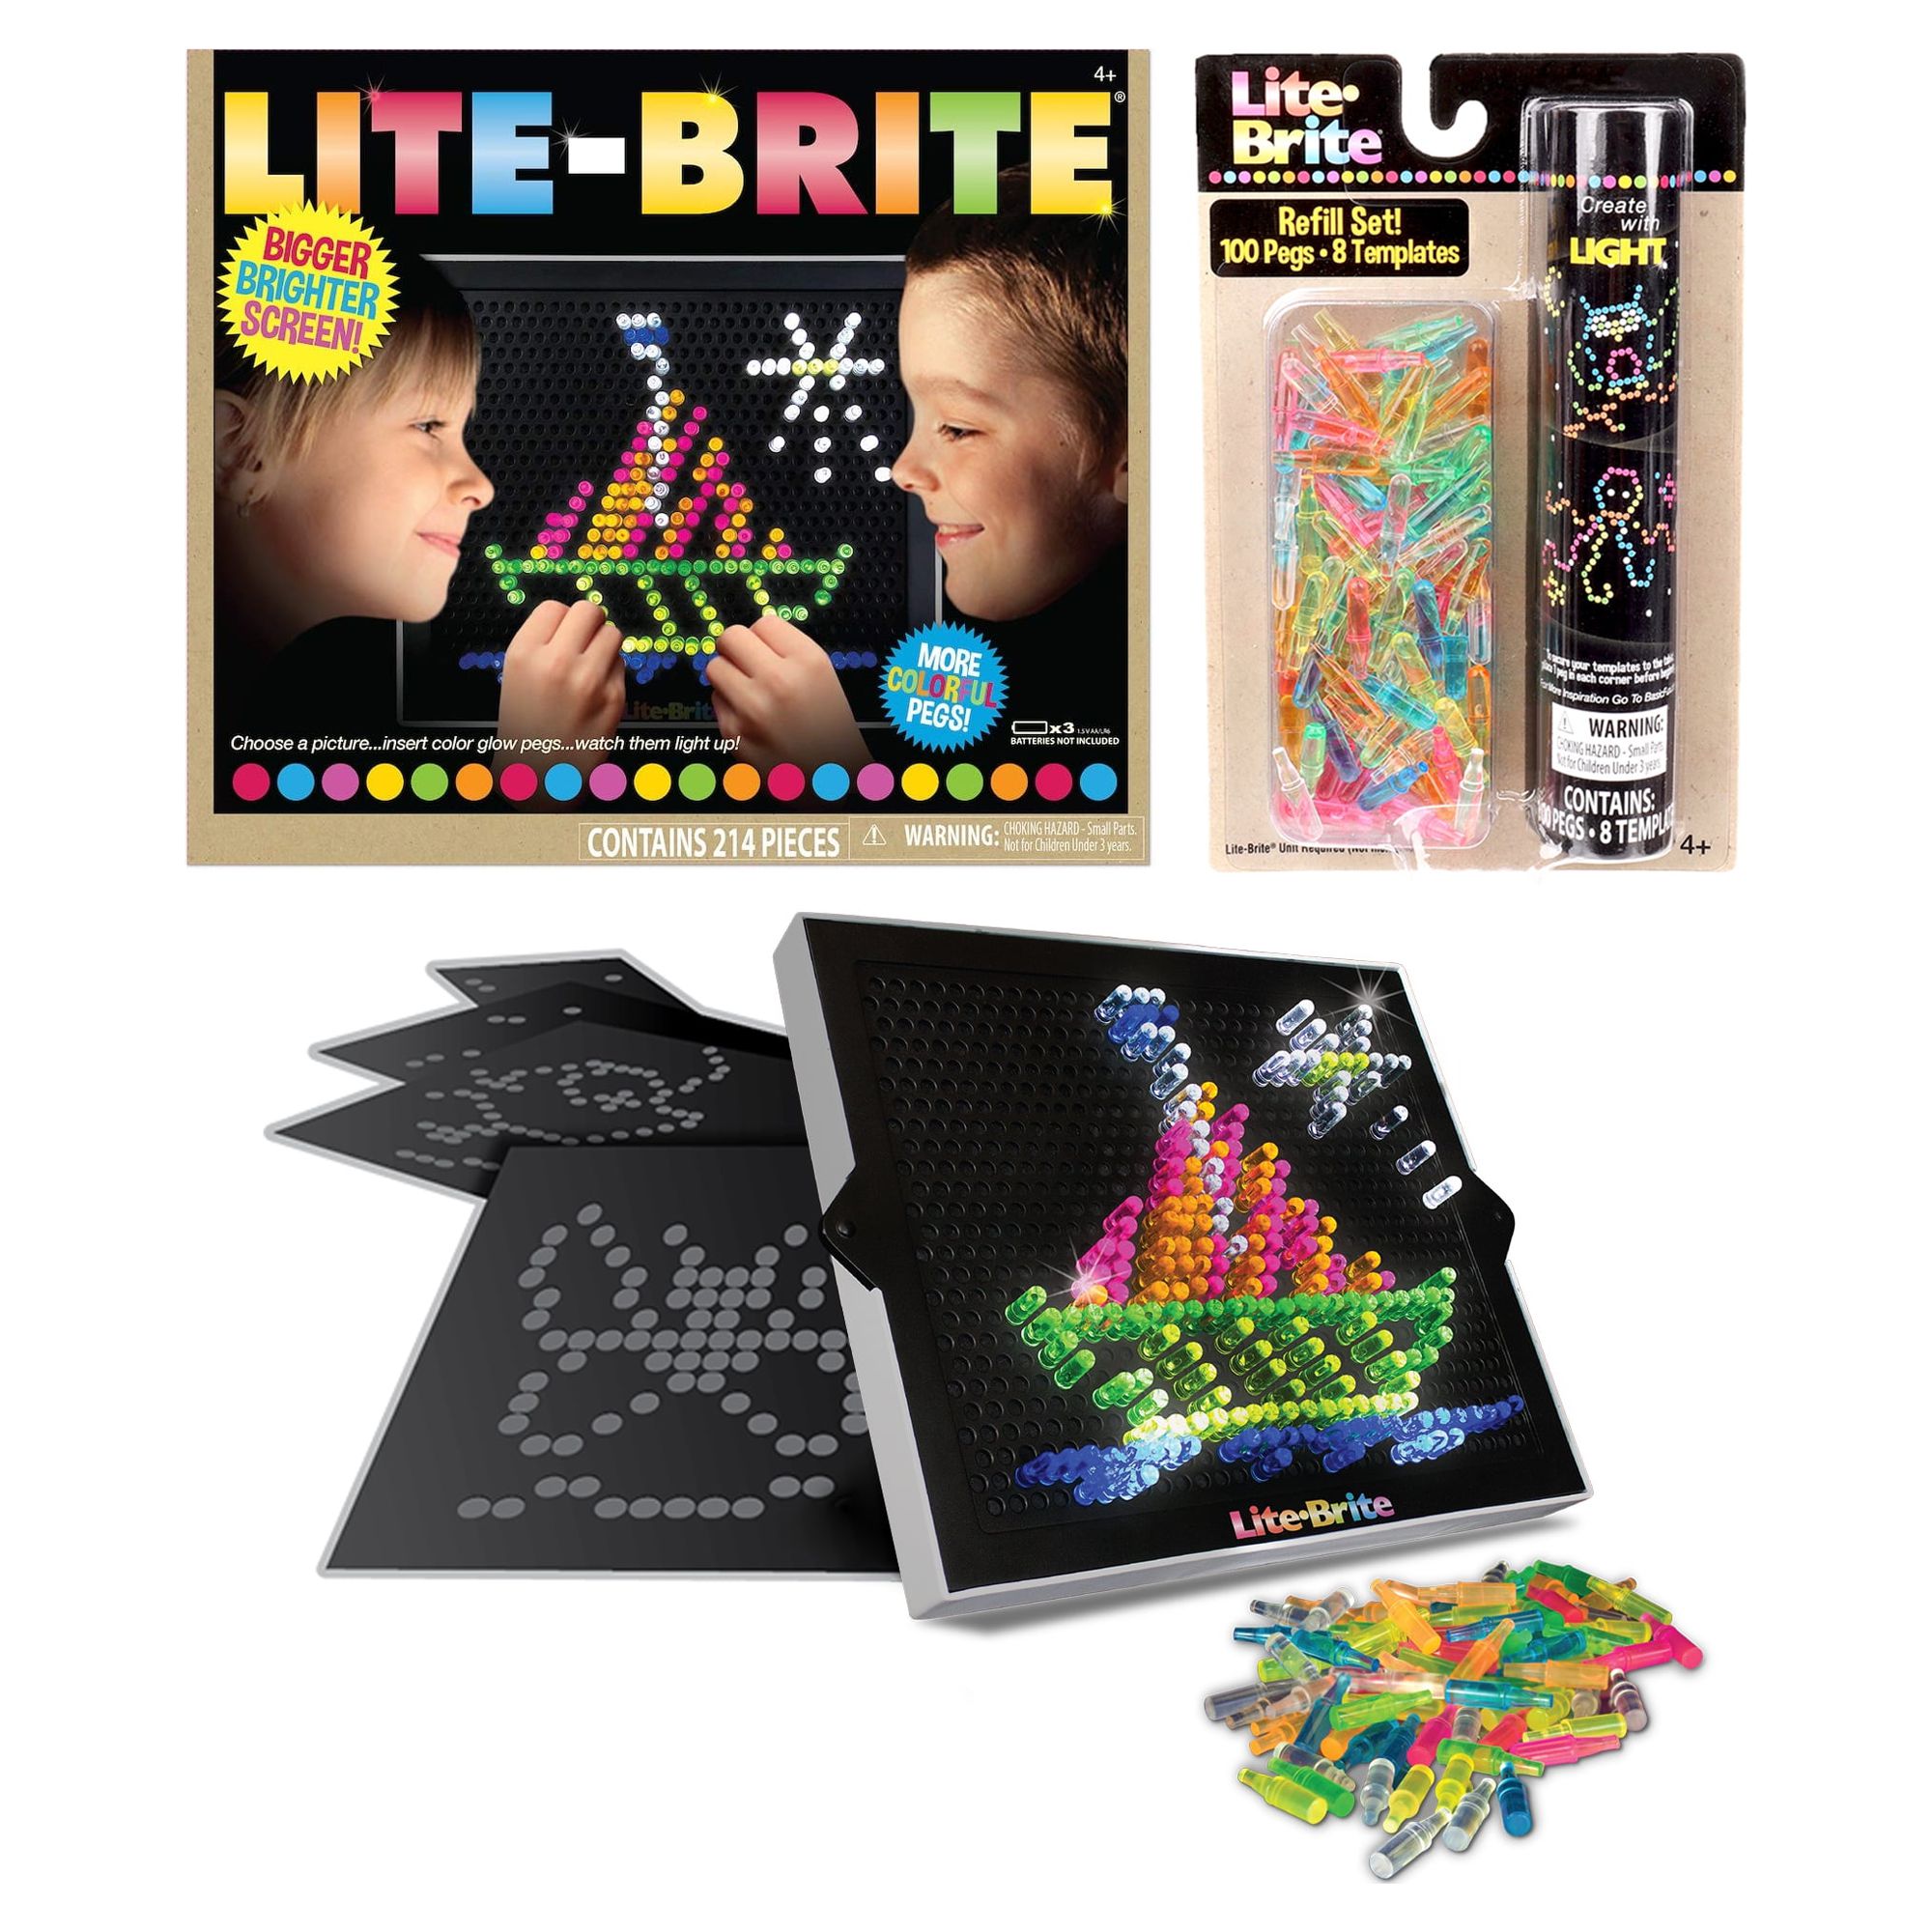 Lite Brite Ultimate Classic & Refill Pack Online Only Value Bundle with 14 Templates & 300 Pegs - image 1 of 4